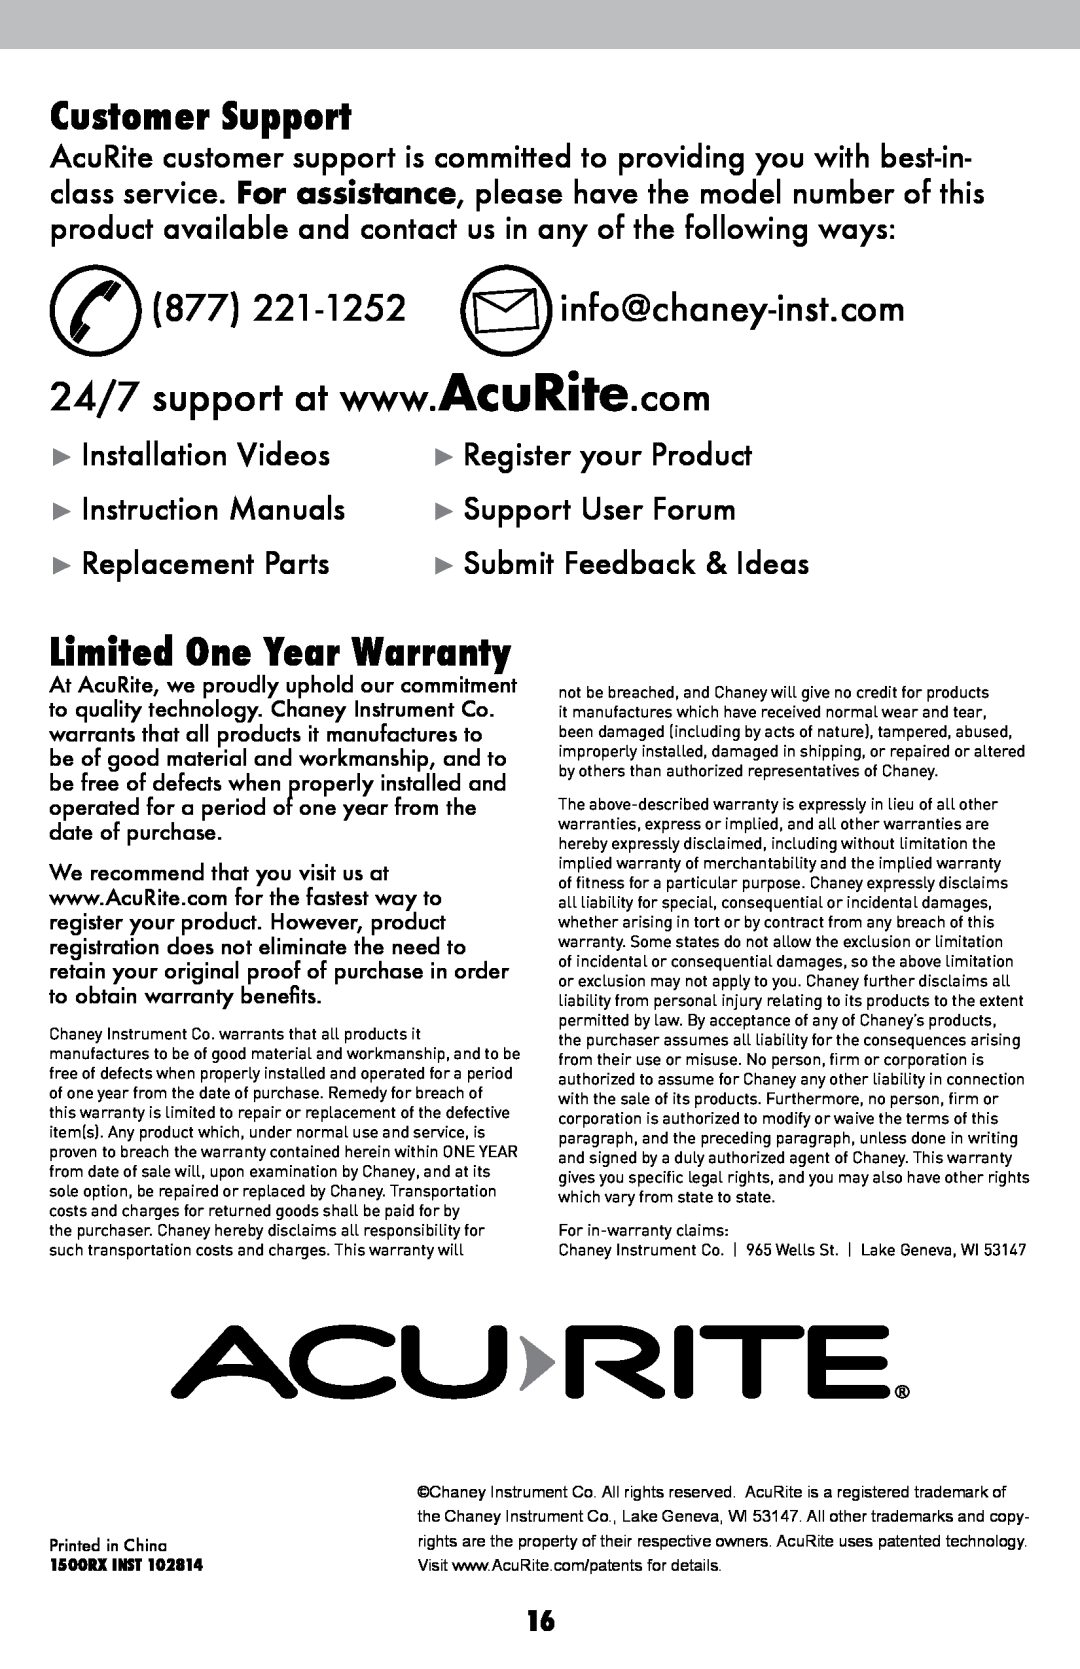 Acu-Rite 1500RX Customer Support, Limited One Year Warranty, 877 221-1252 info@chaney-inst.com, Installation Videos 